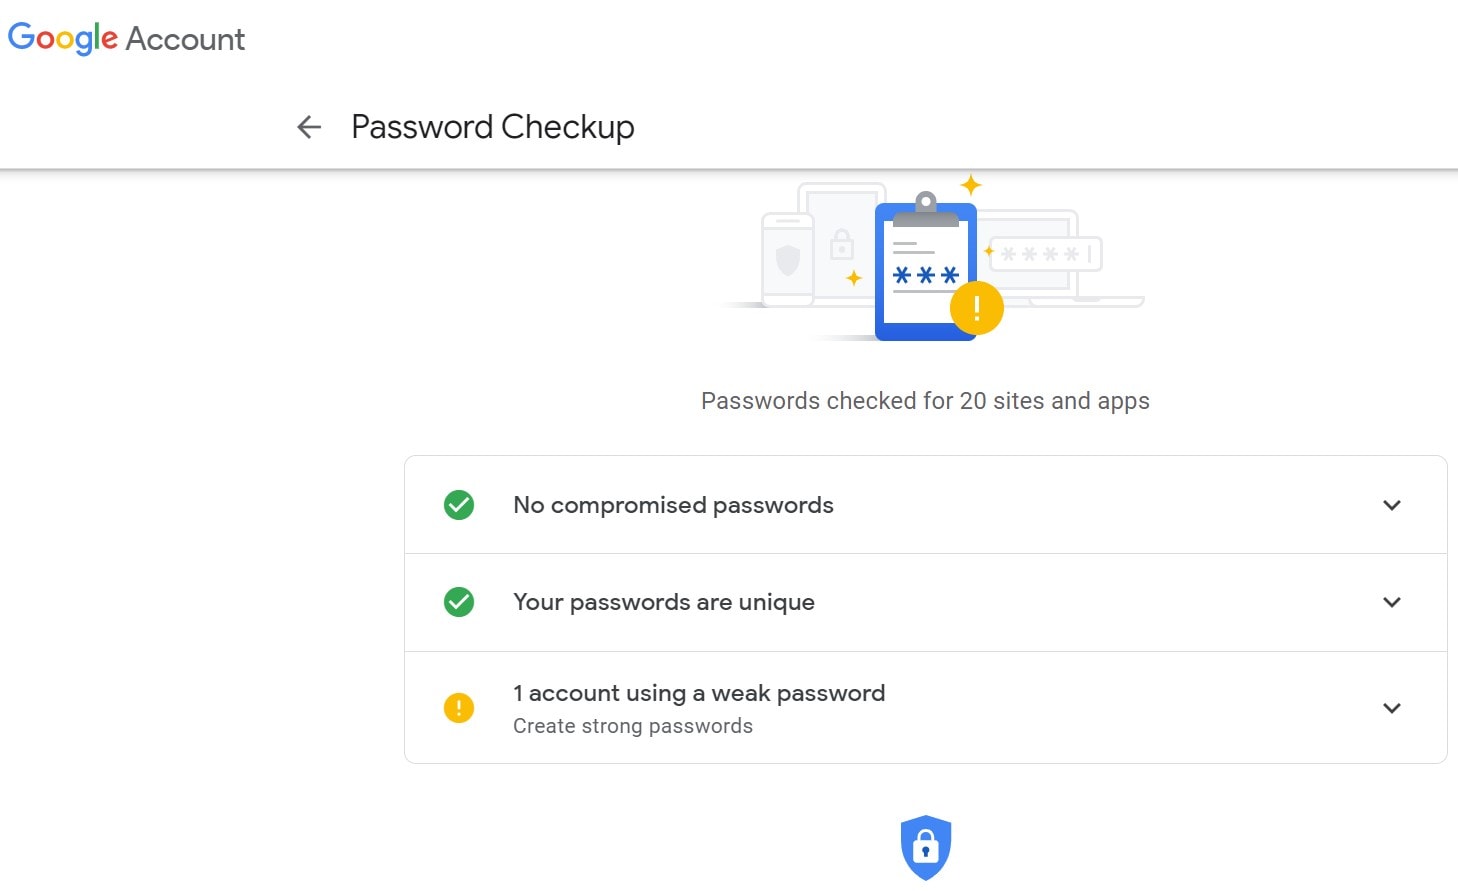 unsafe passwords detected on Google account